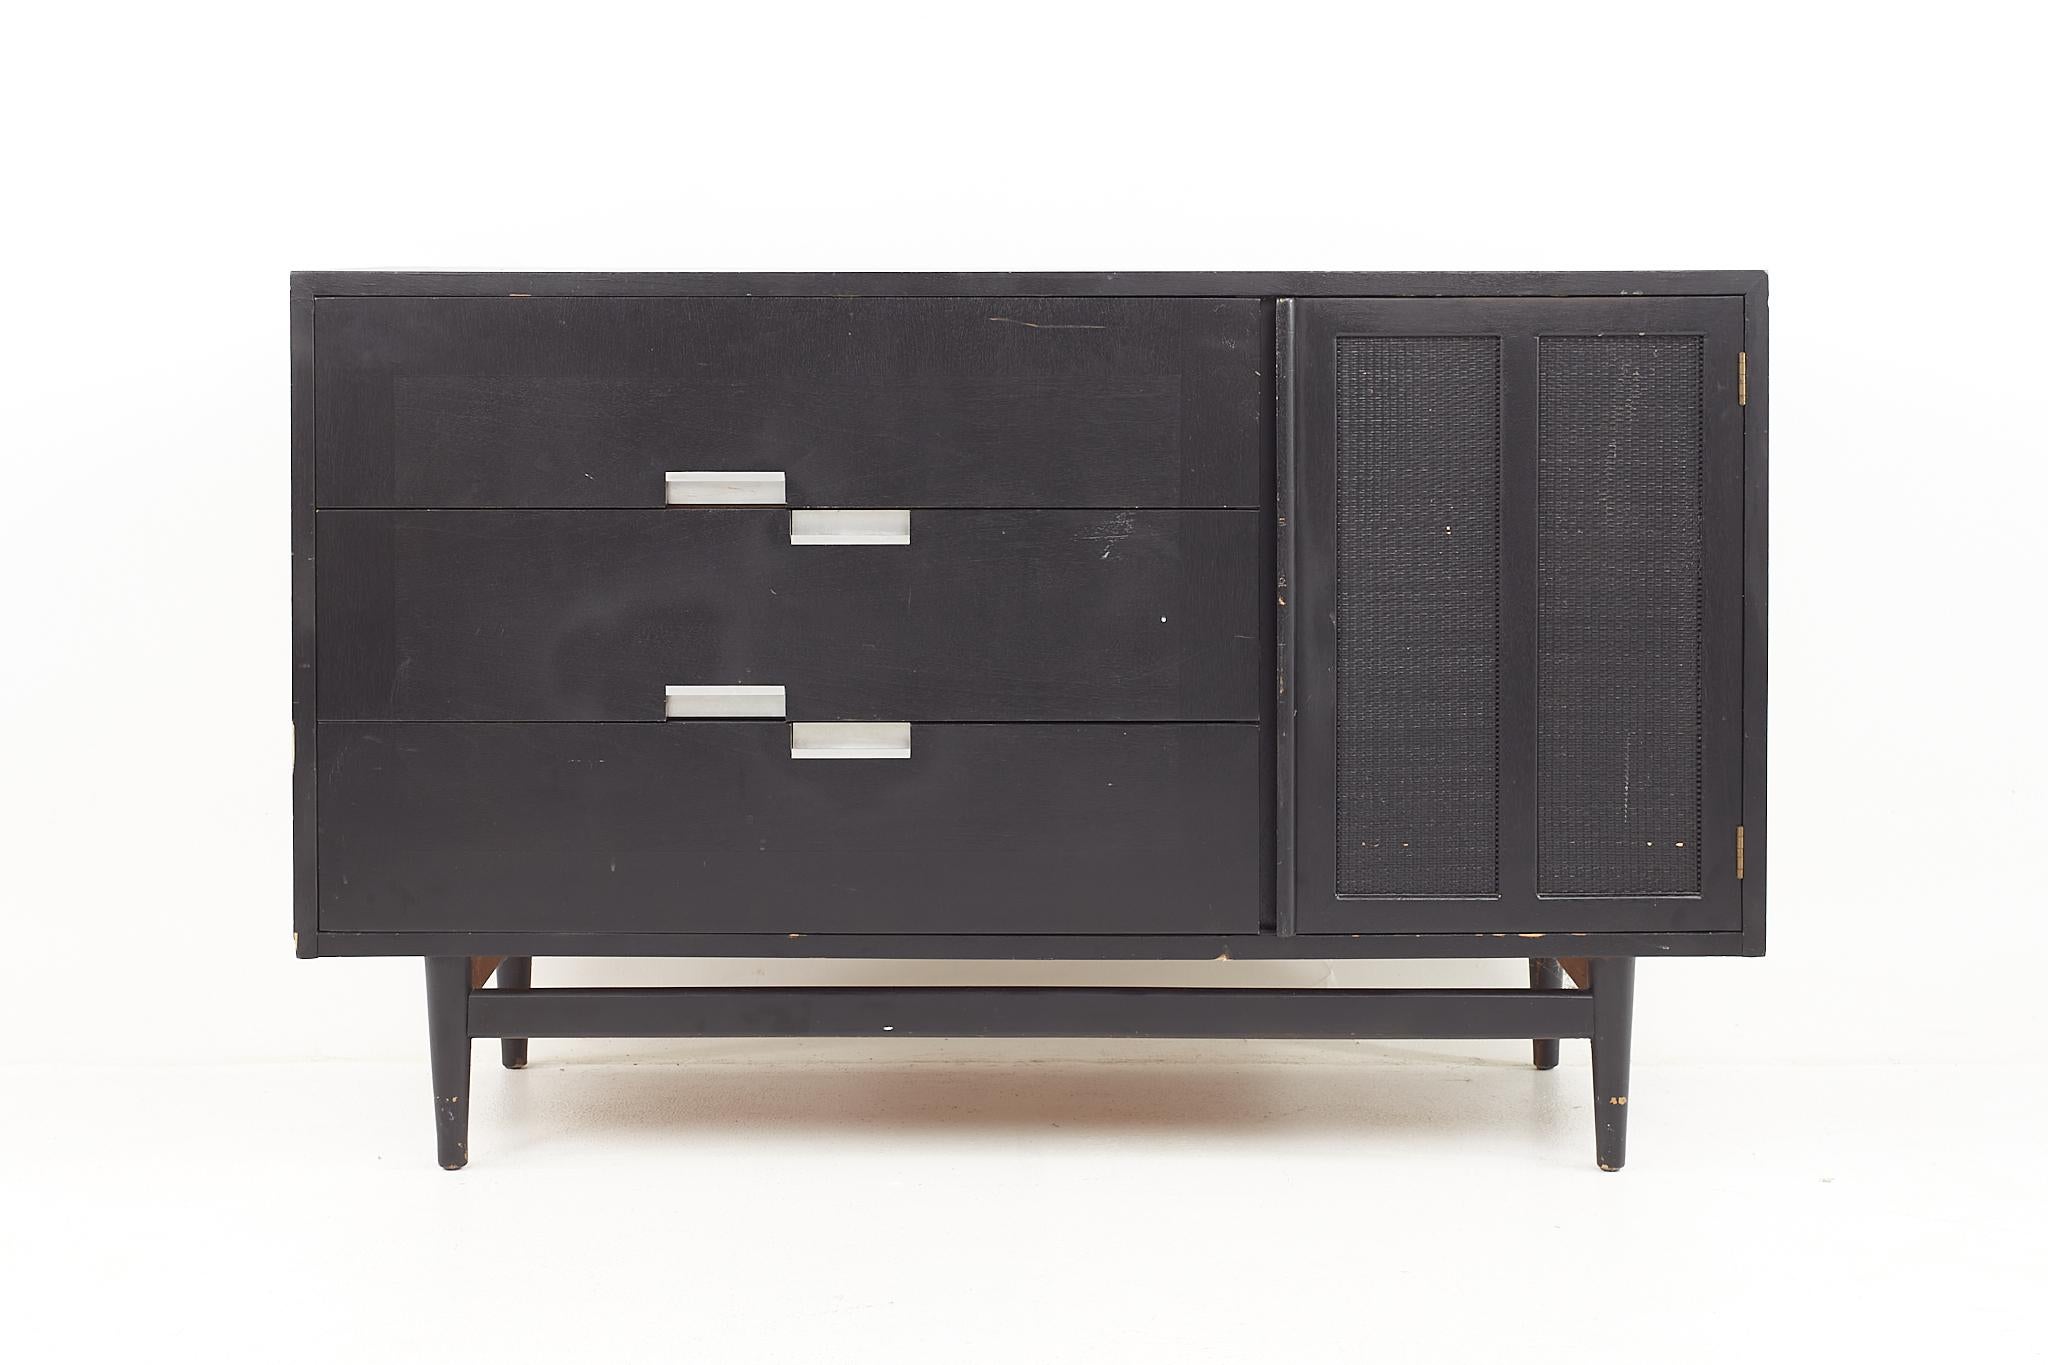 Merton Gershun for American of Martinsville mid century ebonized credenza

The credenza measures: 50 wide x 19 deep x 32 inches high

All pieces of furniture can be had in what we call restored vintage condition. That means the piece is restored